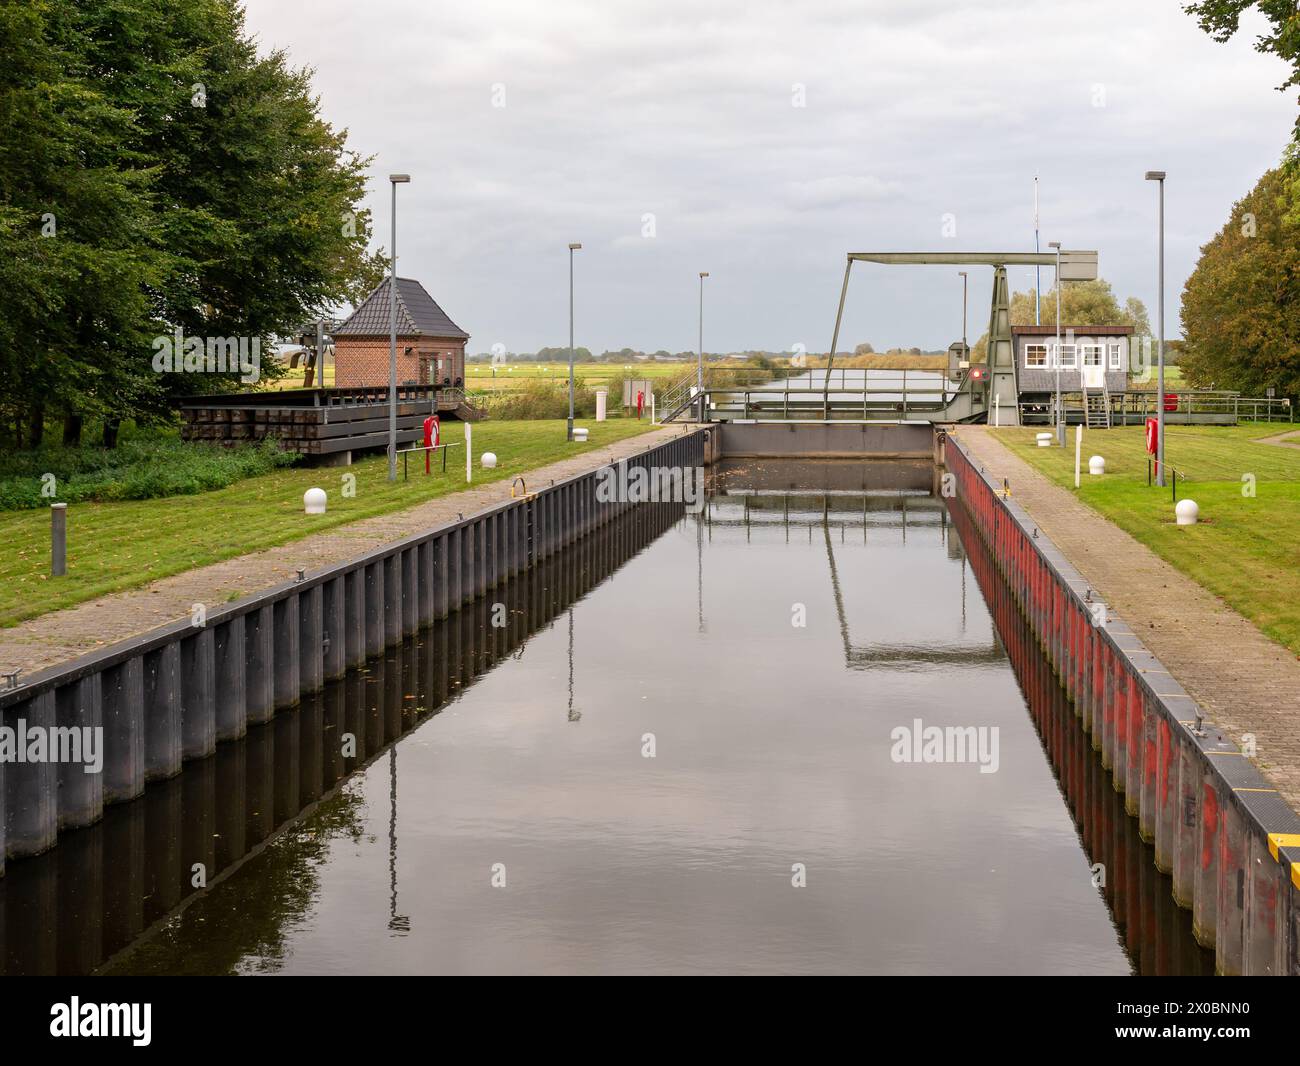 Gieselau canal lock and bascule bridge from Kiel Canal to Eider, Schleswig-Holstein, Germany Stock Photo